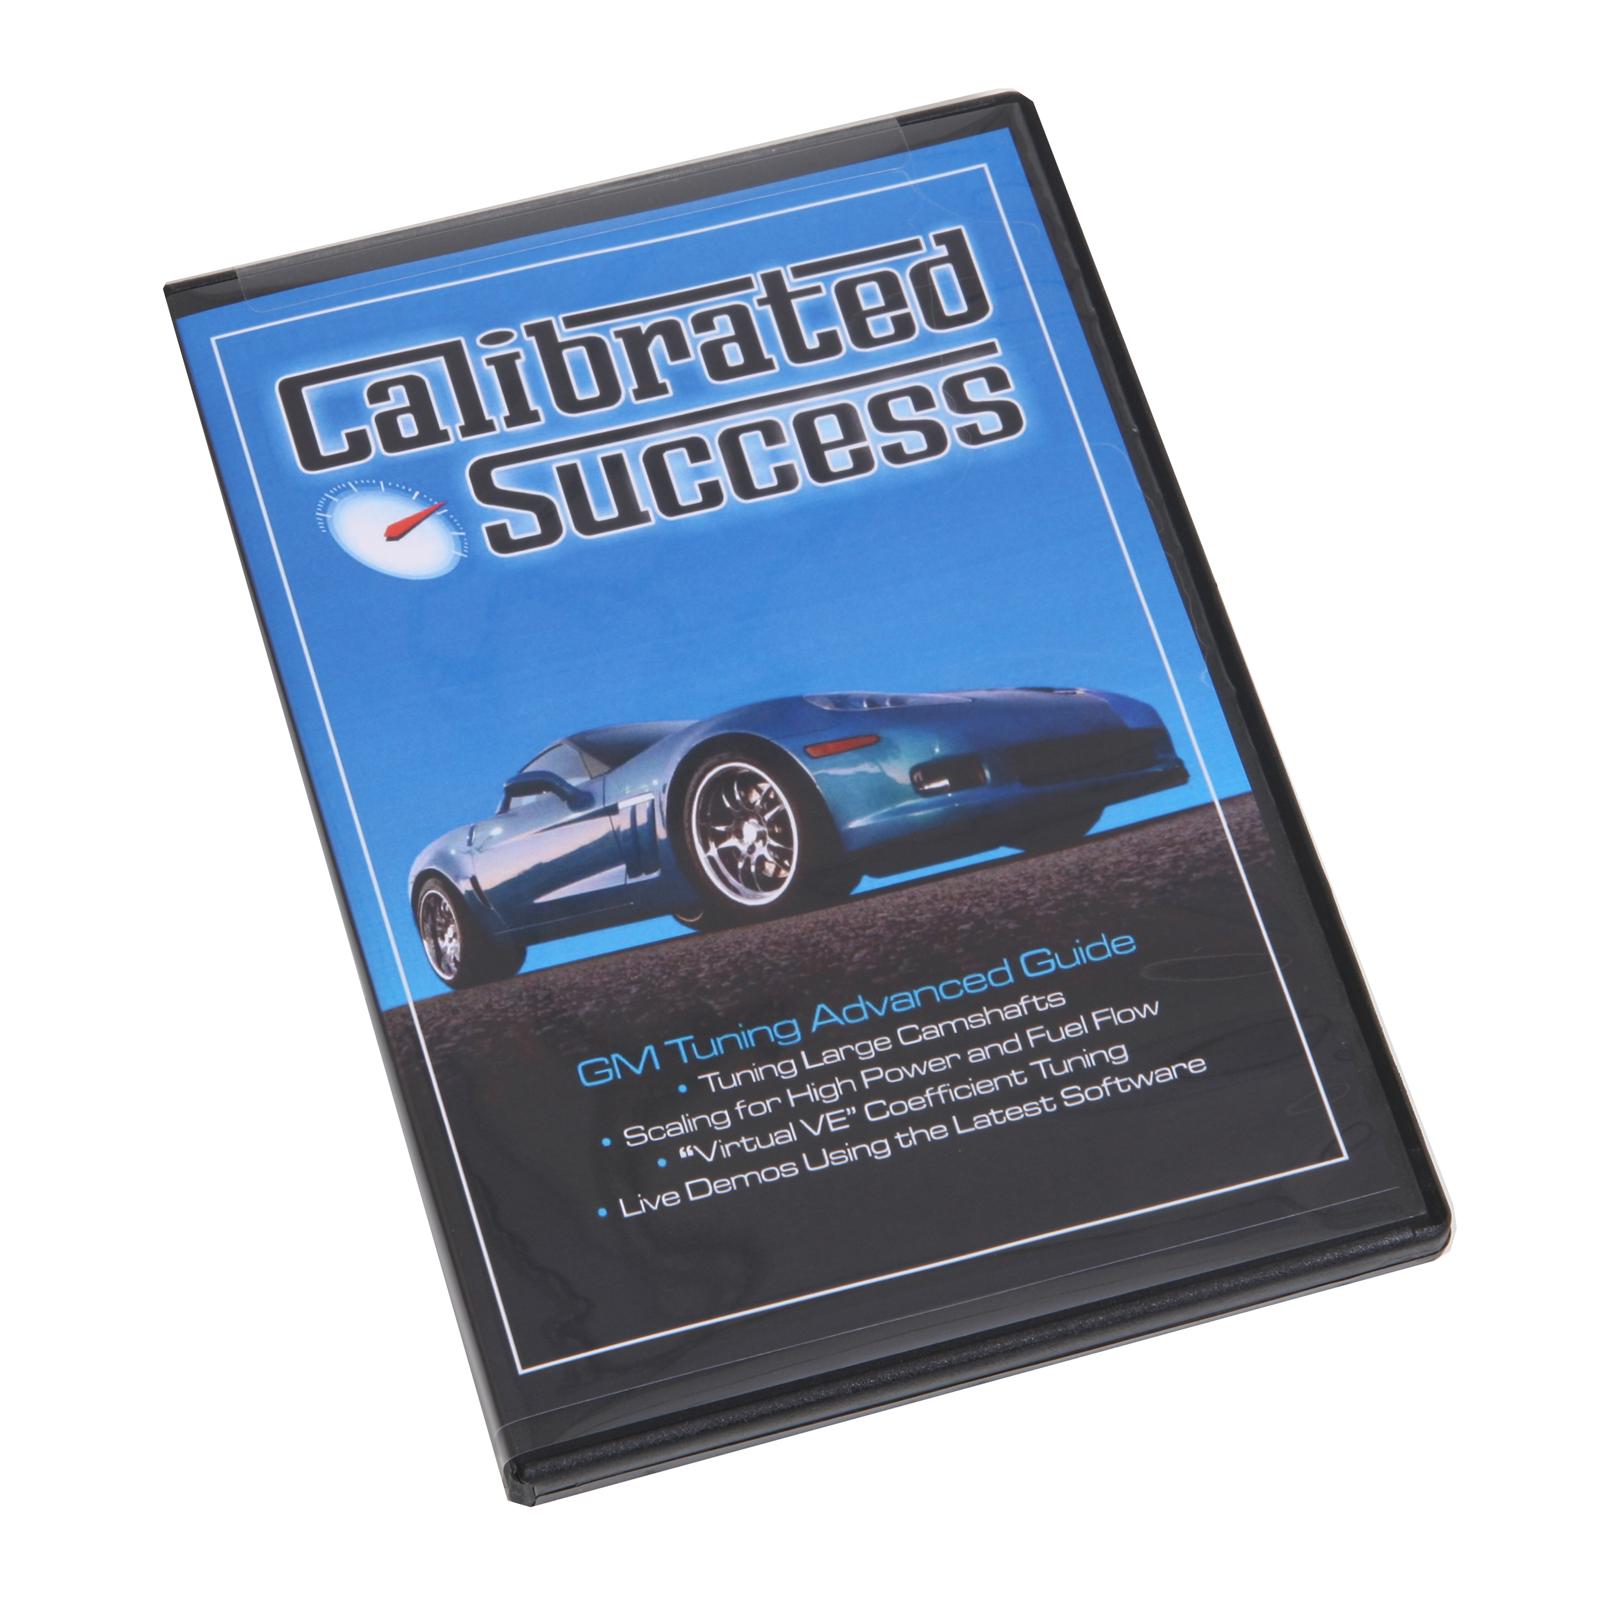 Calibrated success ford dvd